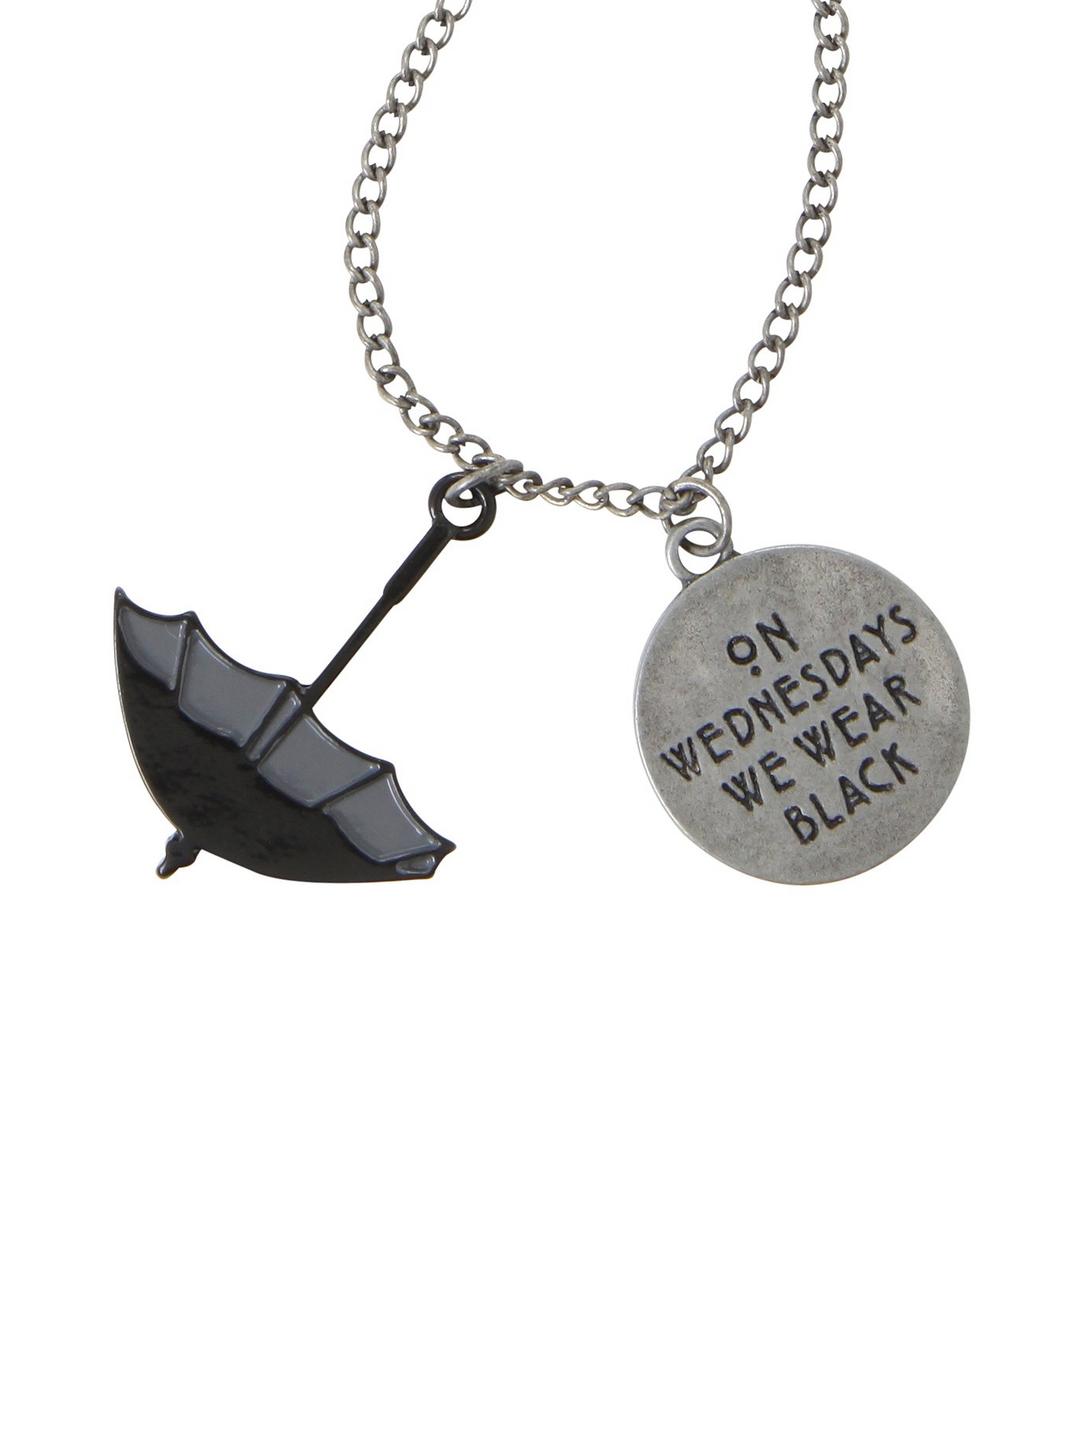 American Horror Story: Coven On Wednesdays We Wear Black Necklace, , hi-res